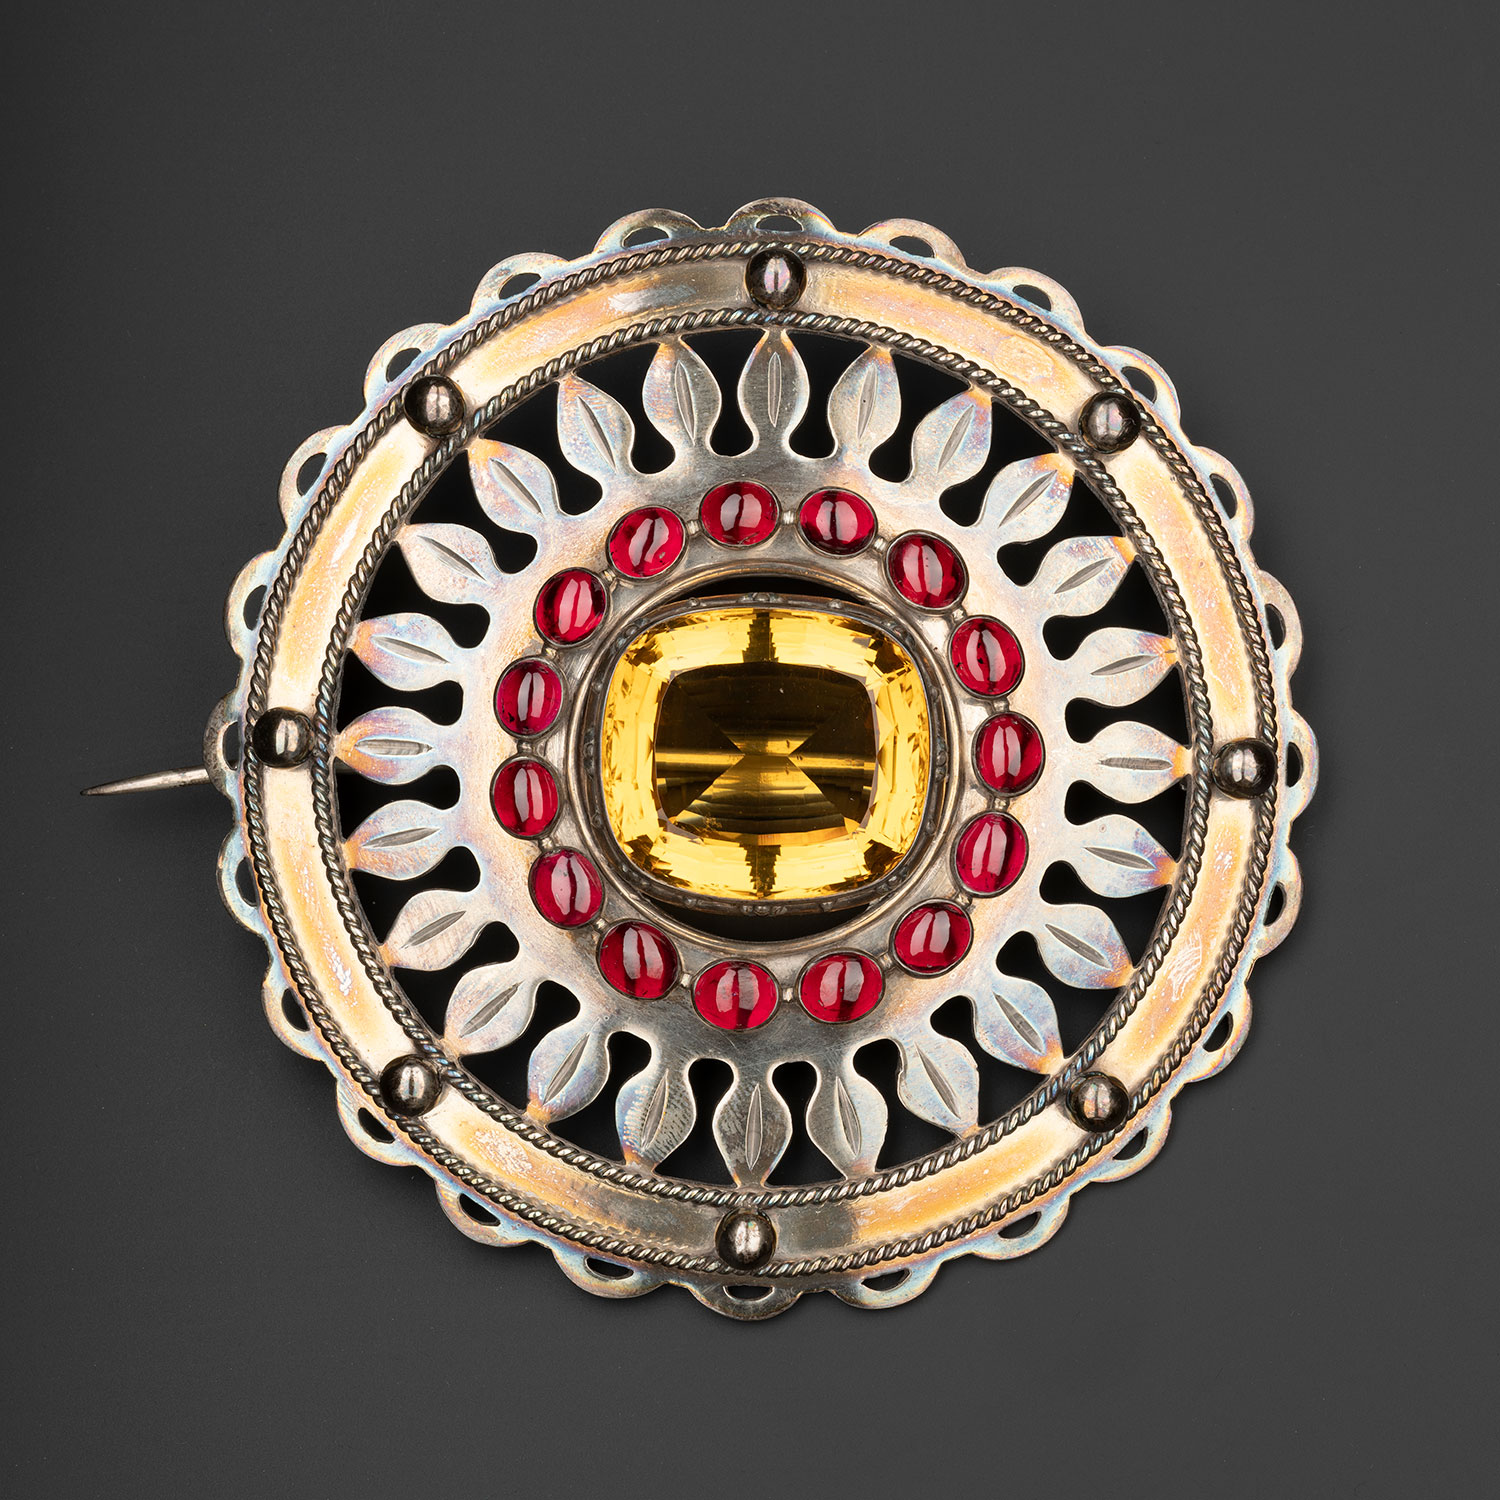 Silver-plaid-brooch-set-with-a-cairngorm-in-the-centre-and-a-ring-of-sixteen-carbuncles-round-it,-worn-by-the-chiefs-of-Clanranald,-mid-19th-century-1500px.jpg